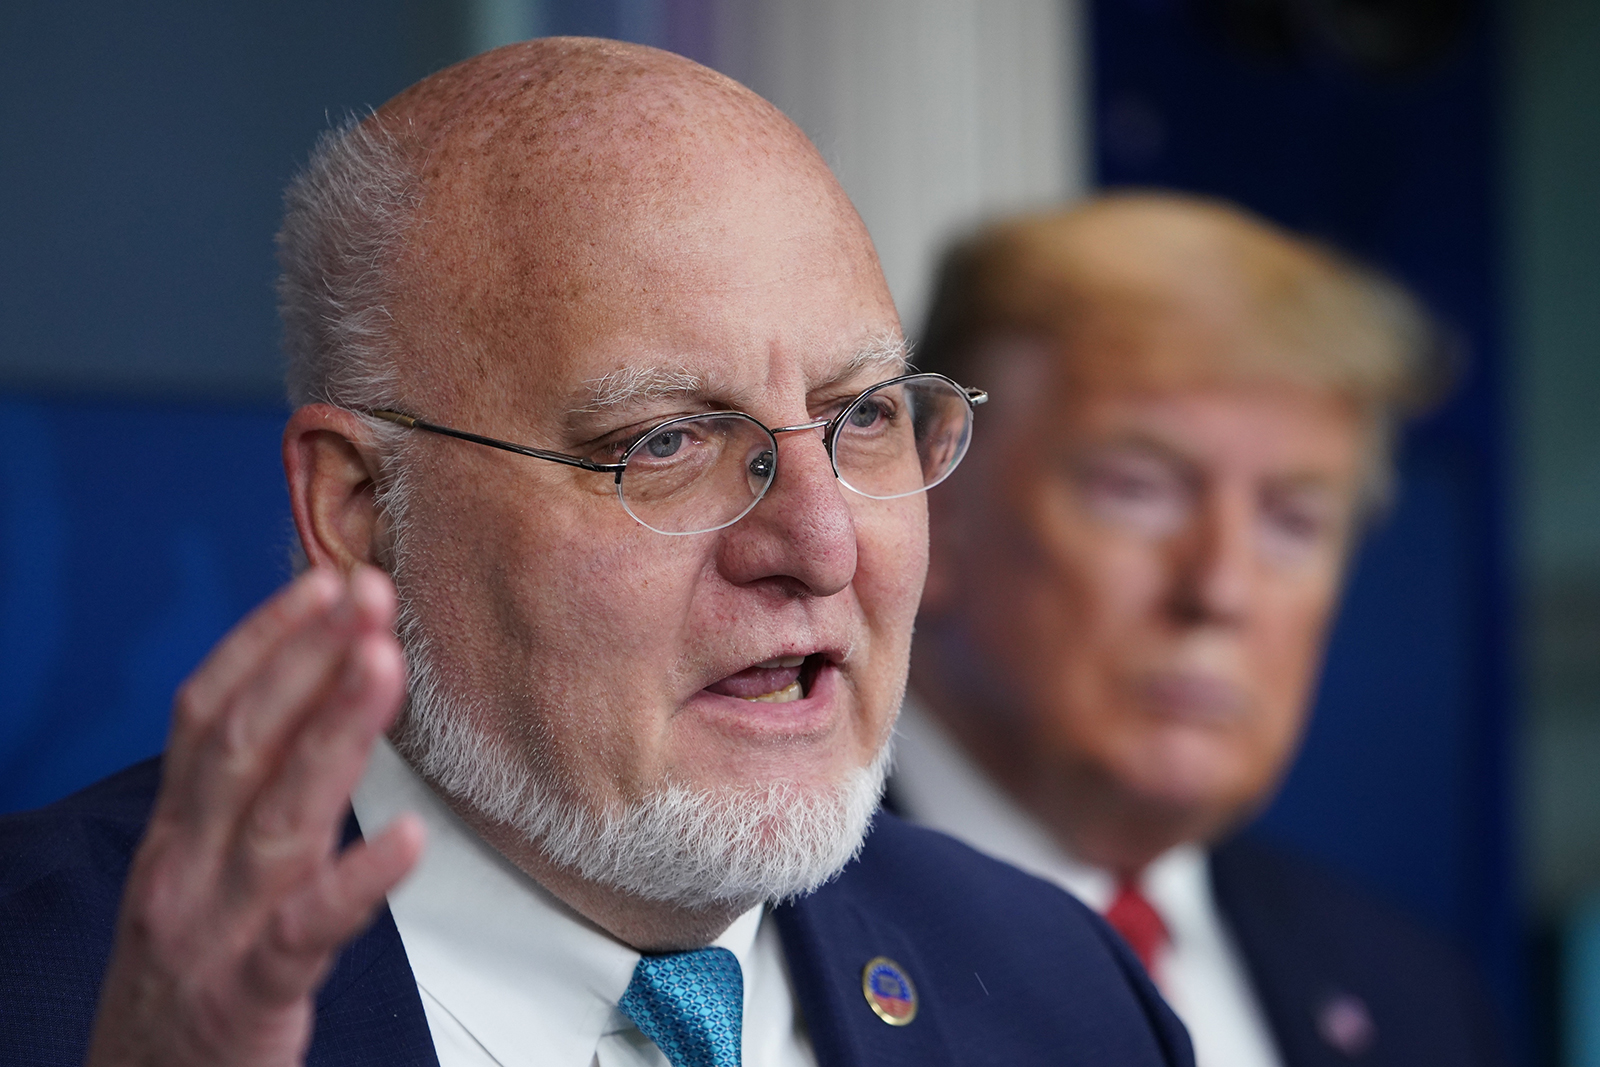 Center for Disease Control Director Robert R. Redfield speaks during the daily briefing on Covid-19 at the White House on April 16.